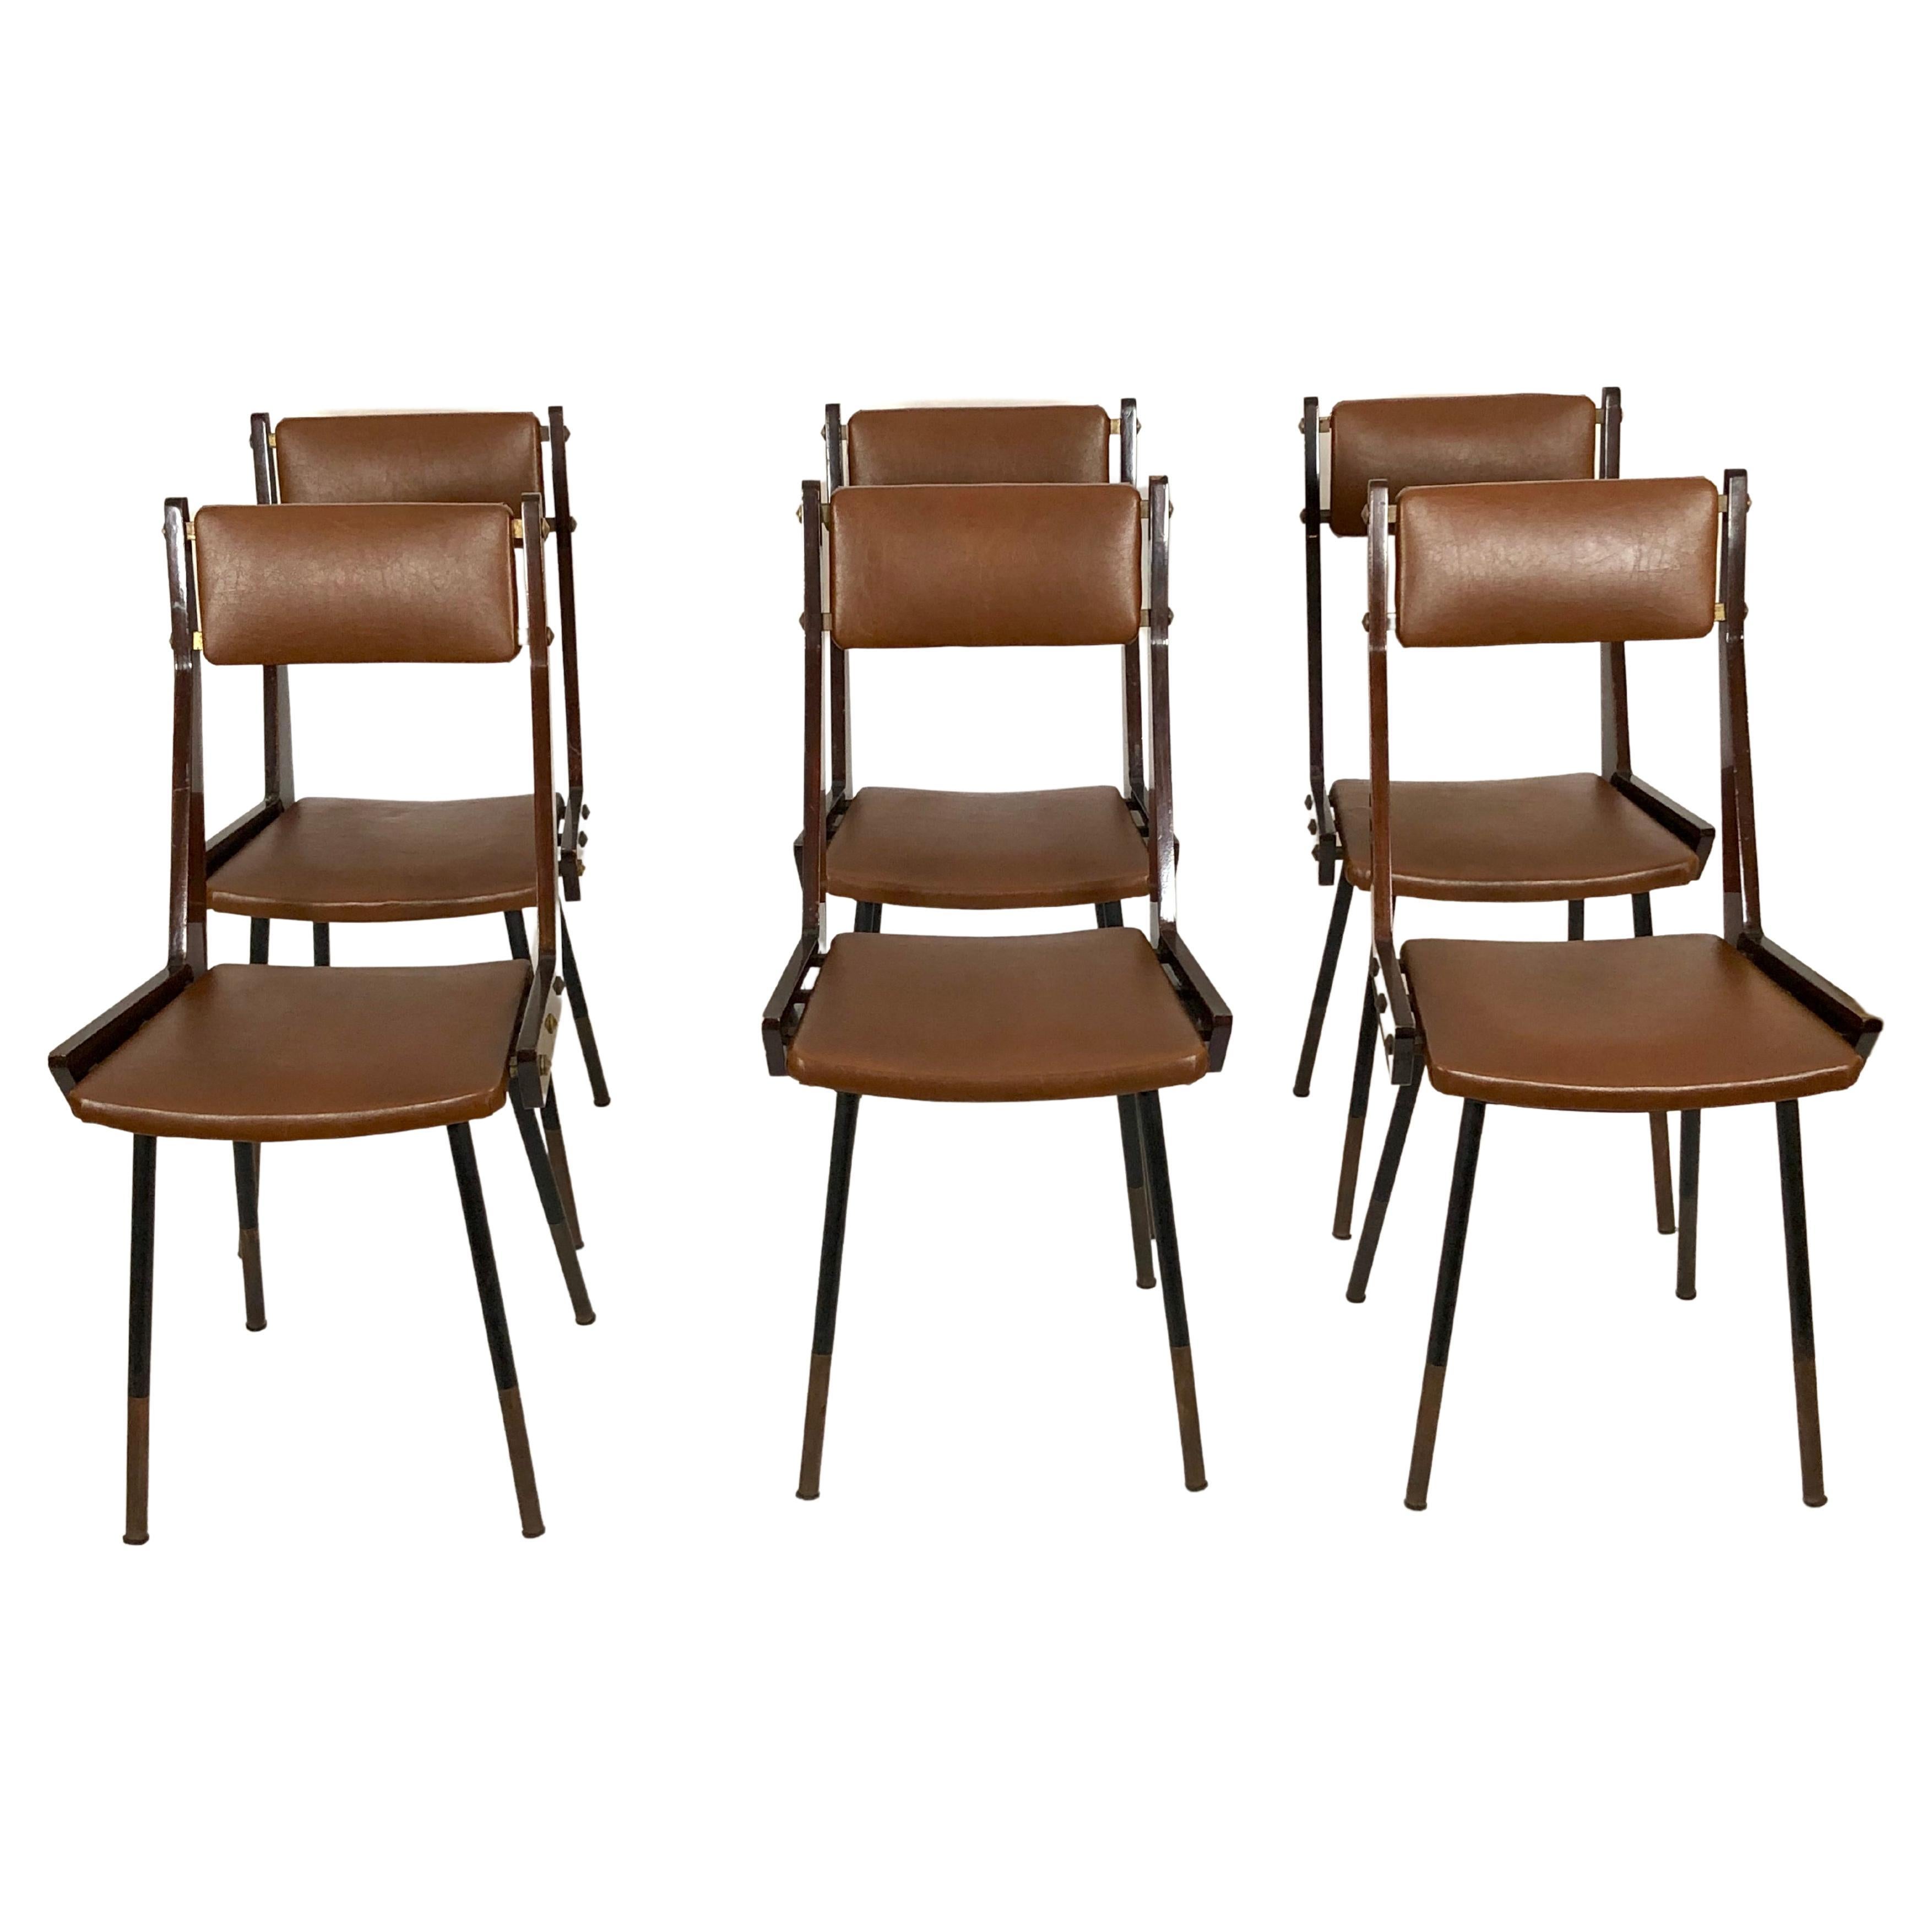 Carlo Ratti, set of six wood and metal dining chairs from 50s